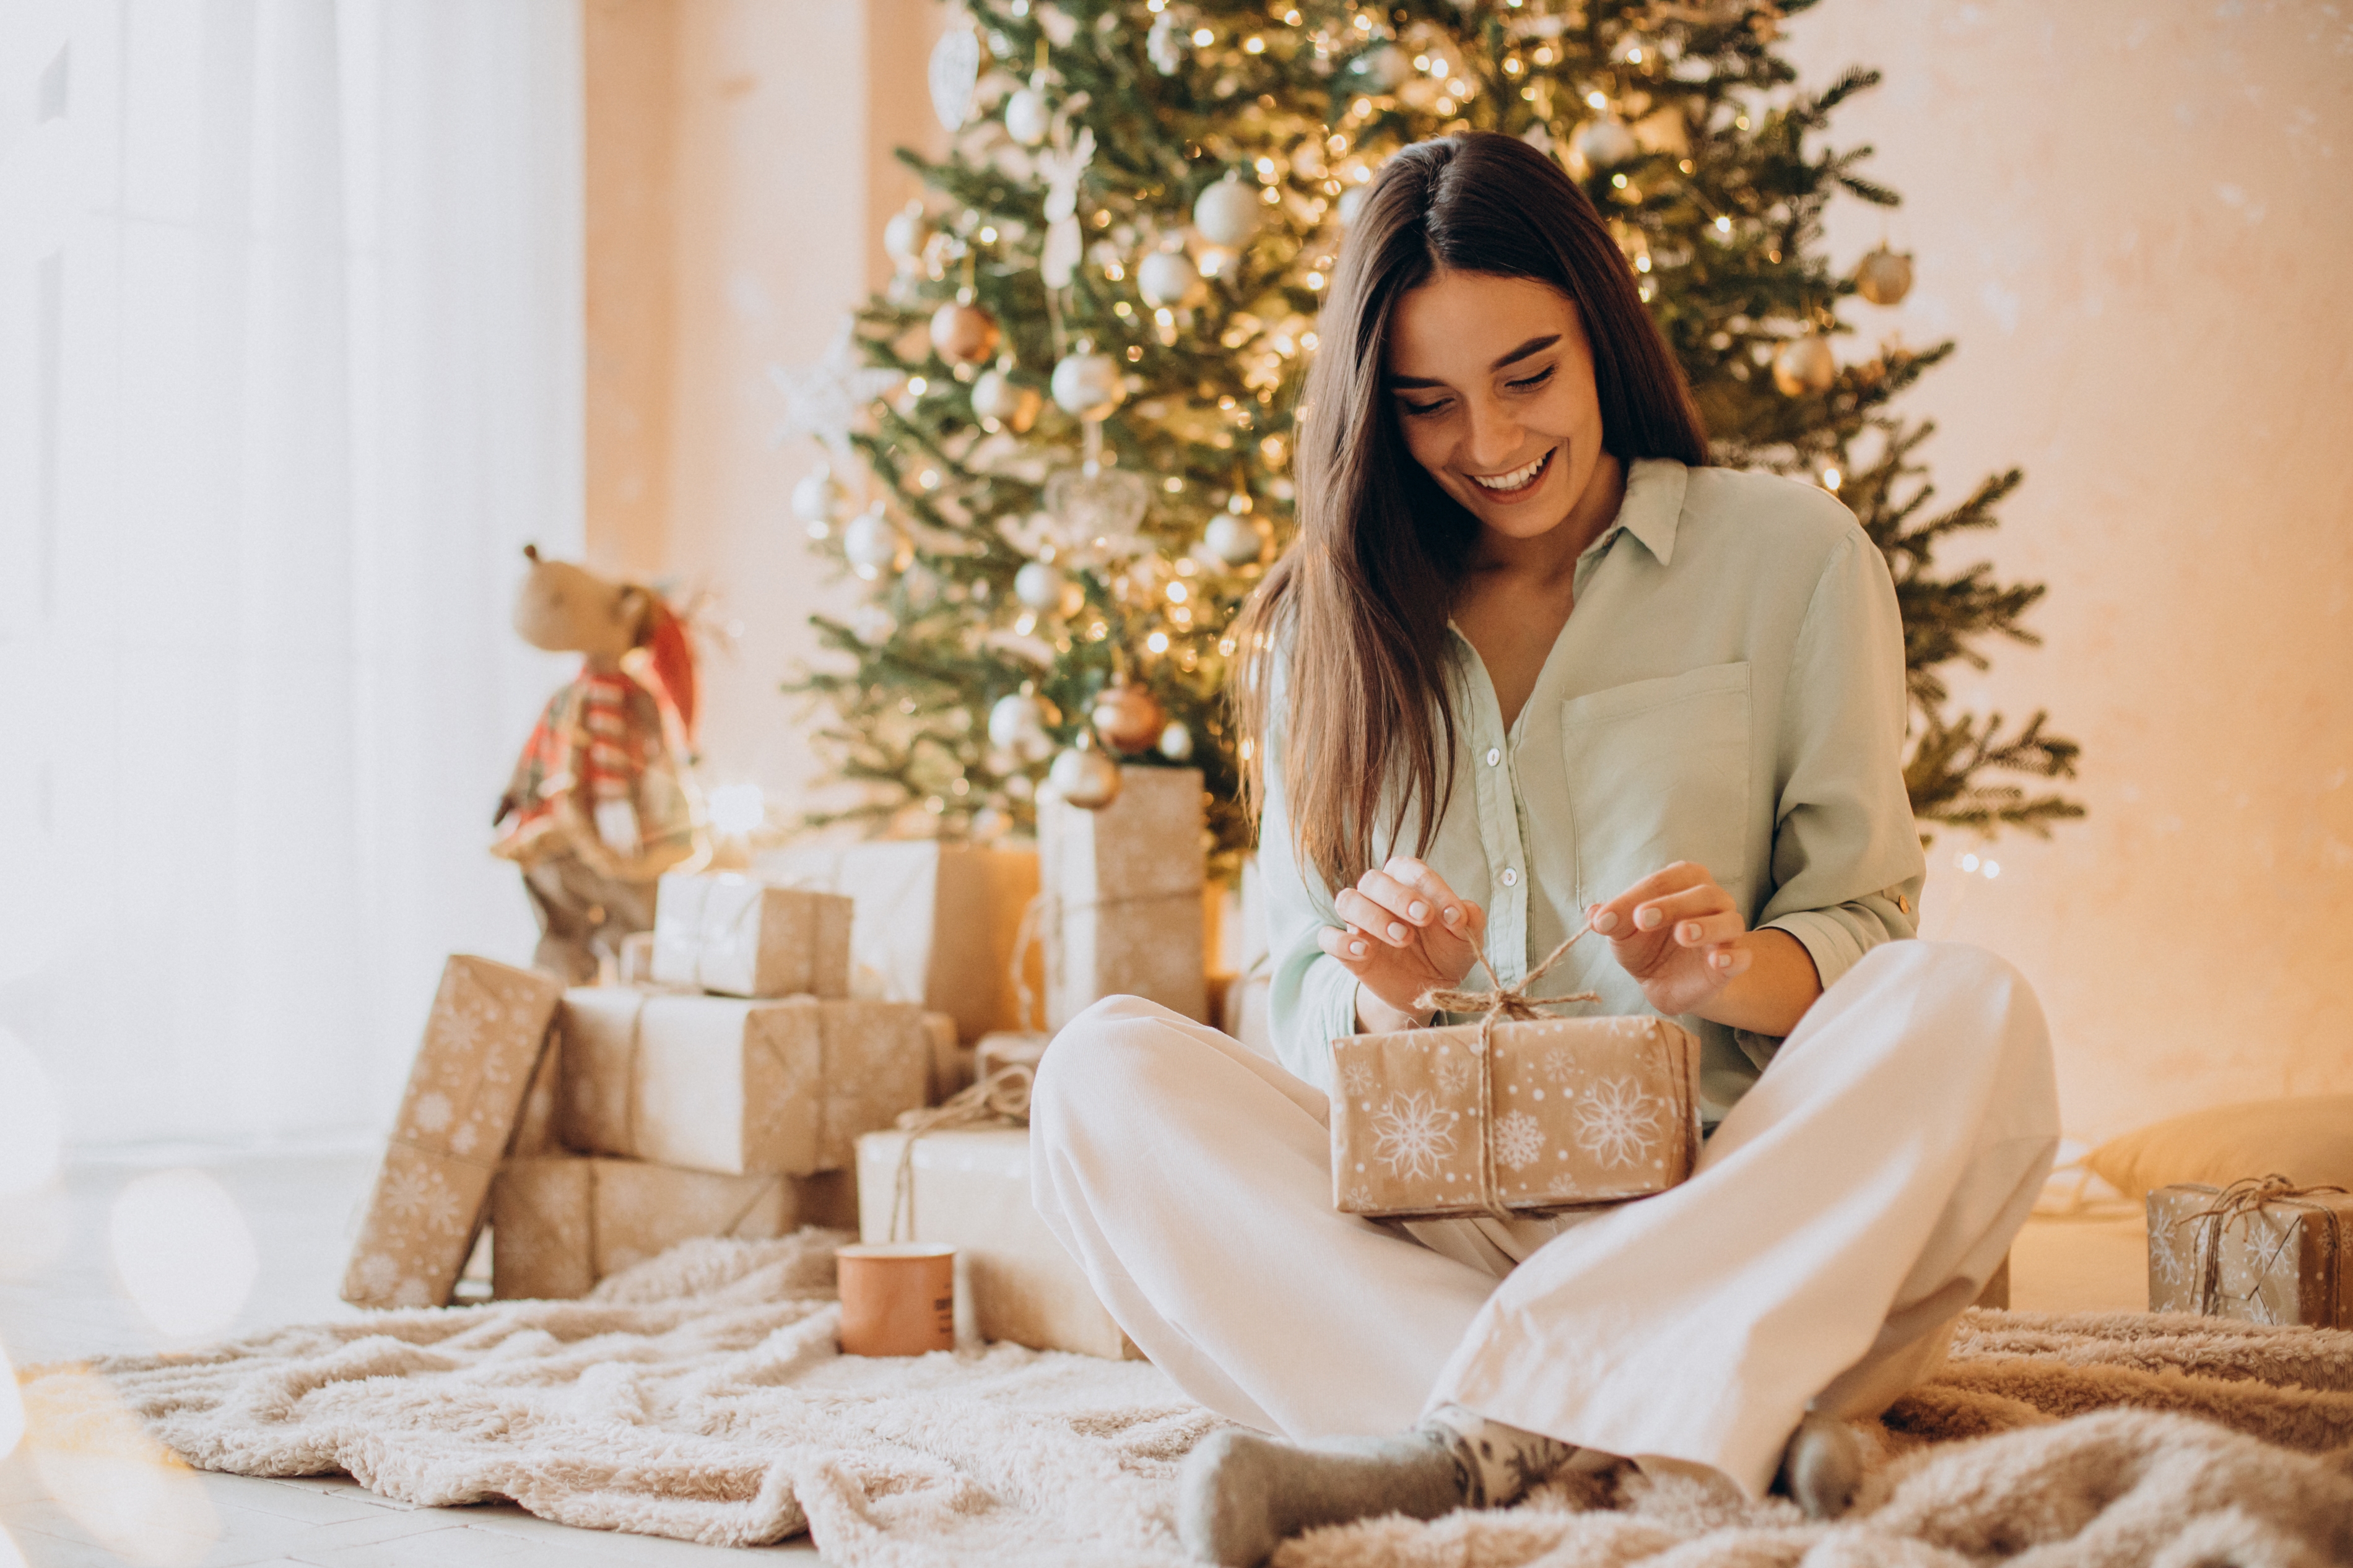 A woman opening a gift | Source: Shutterstock